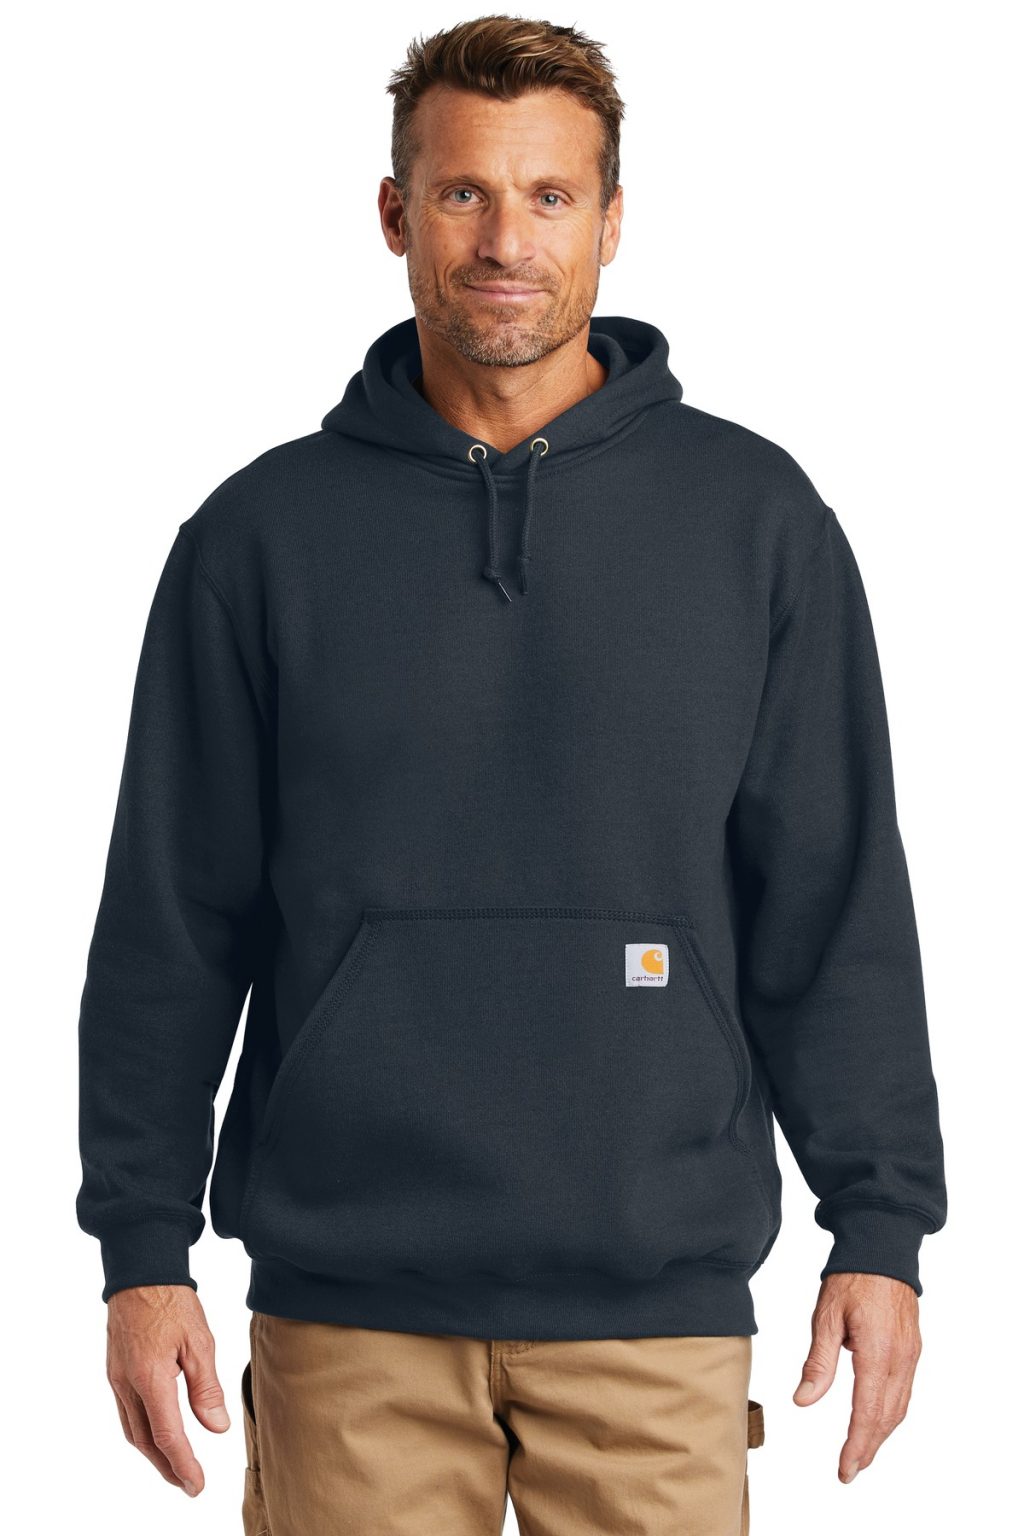 Carhartt ® Midweight Hooded Sweatshirt. CTK121 | Central Roofing